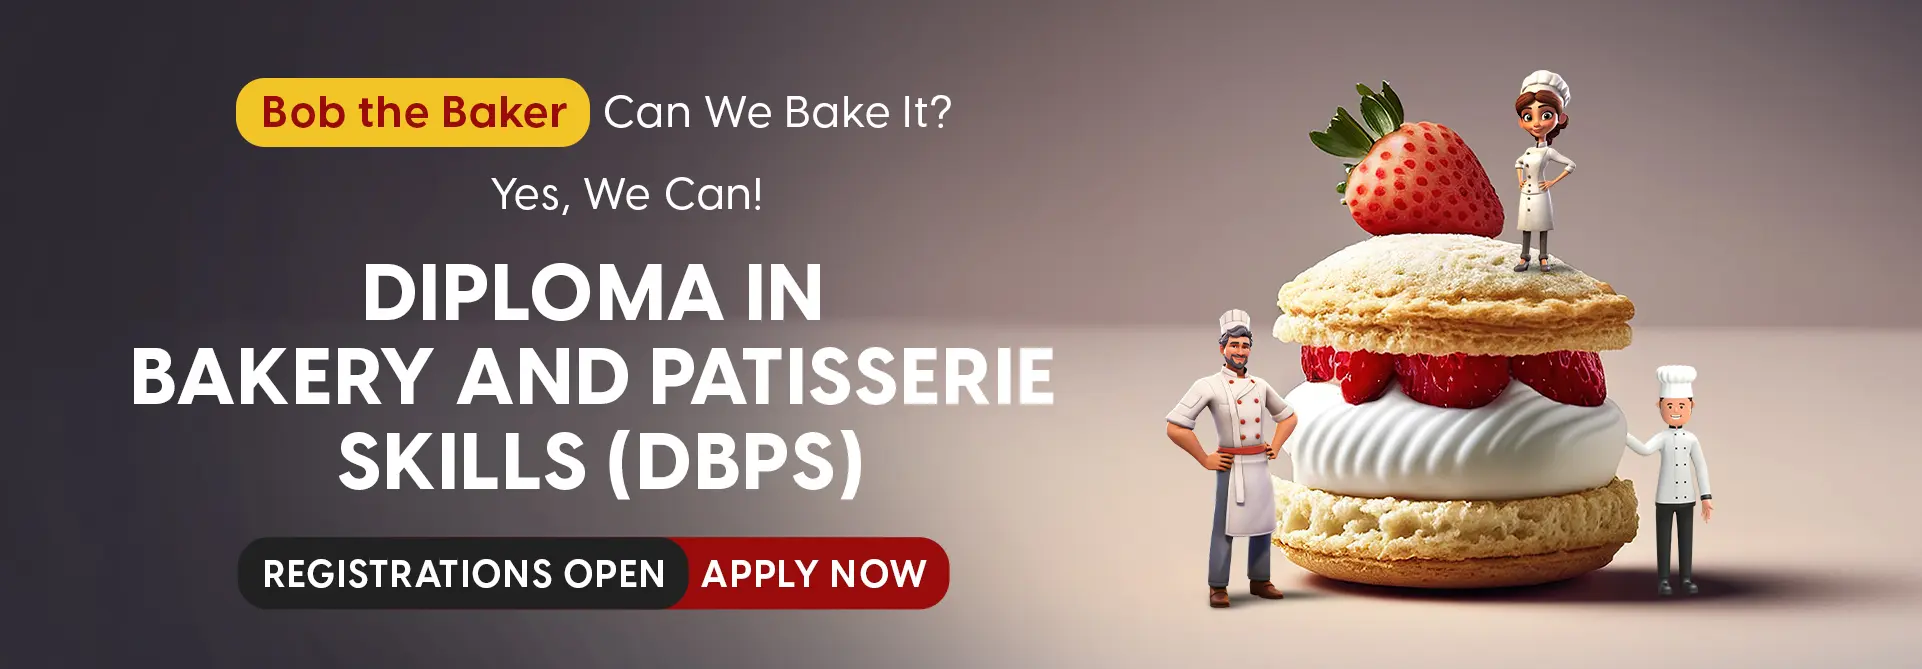 Diploma in Bakery and Patisserie Skills